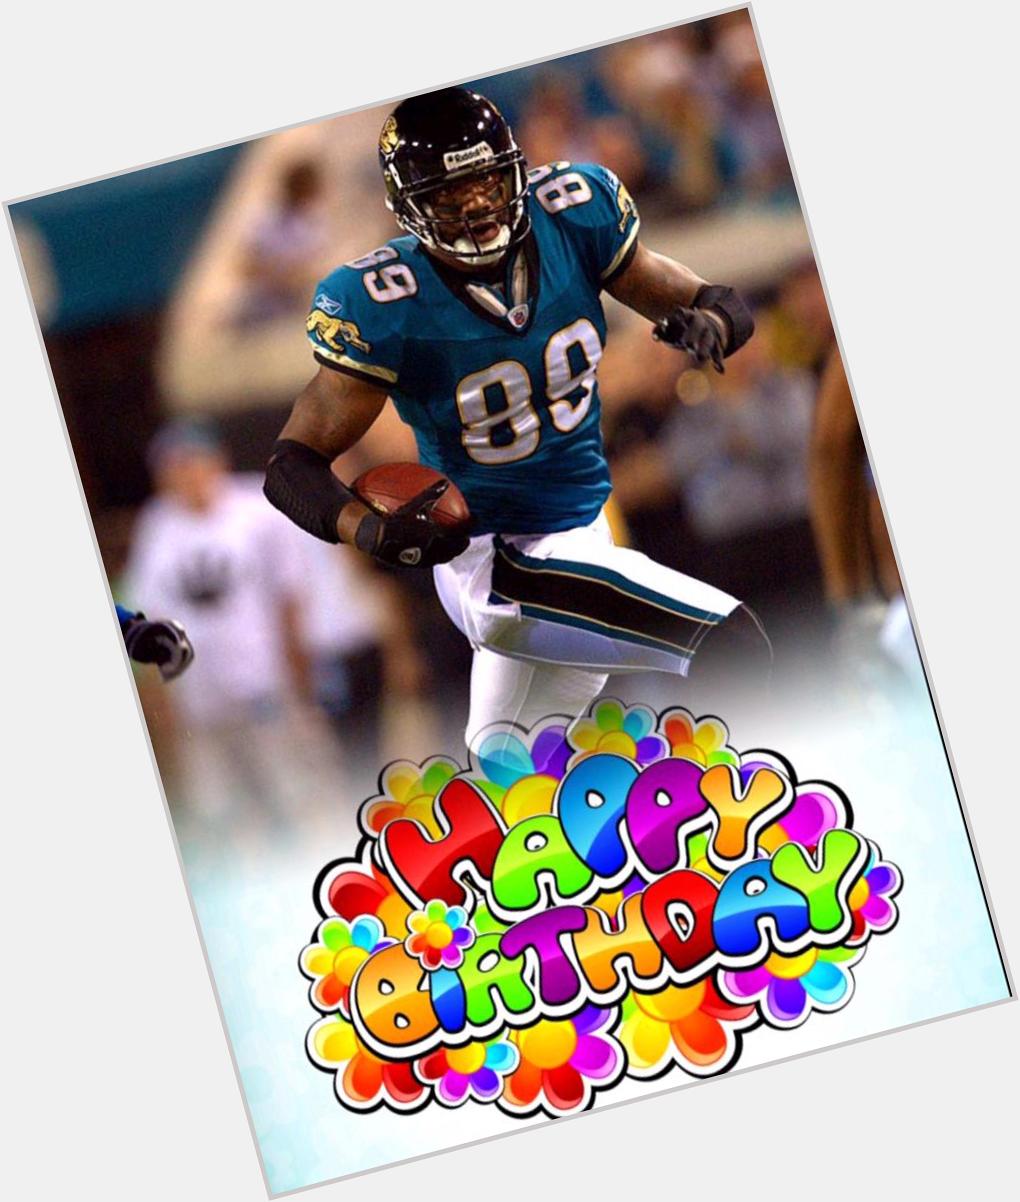 Happy Birthday to Marcedes Lewis! The veteran tight end has had a productive career backed up by a pro bowl 